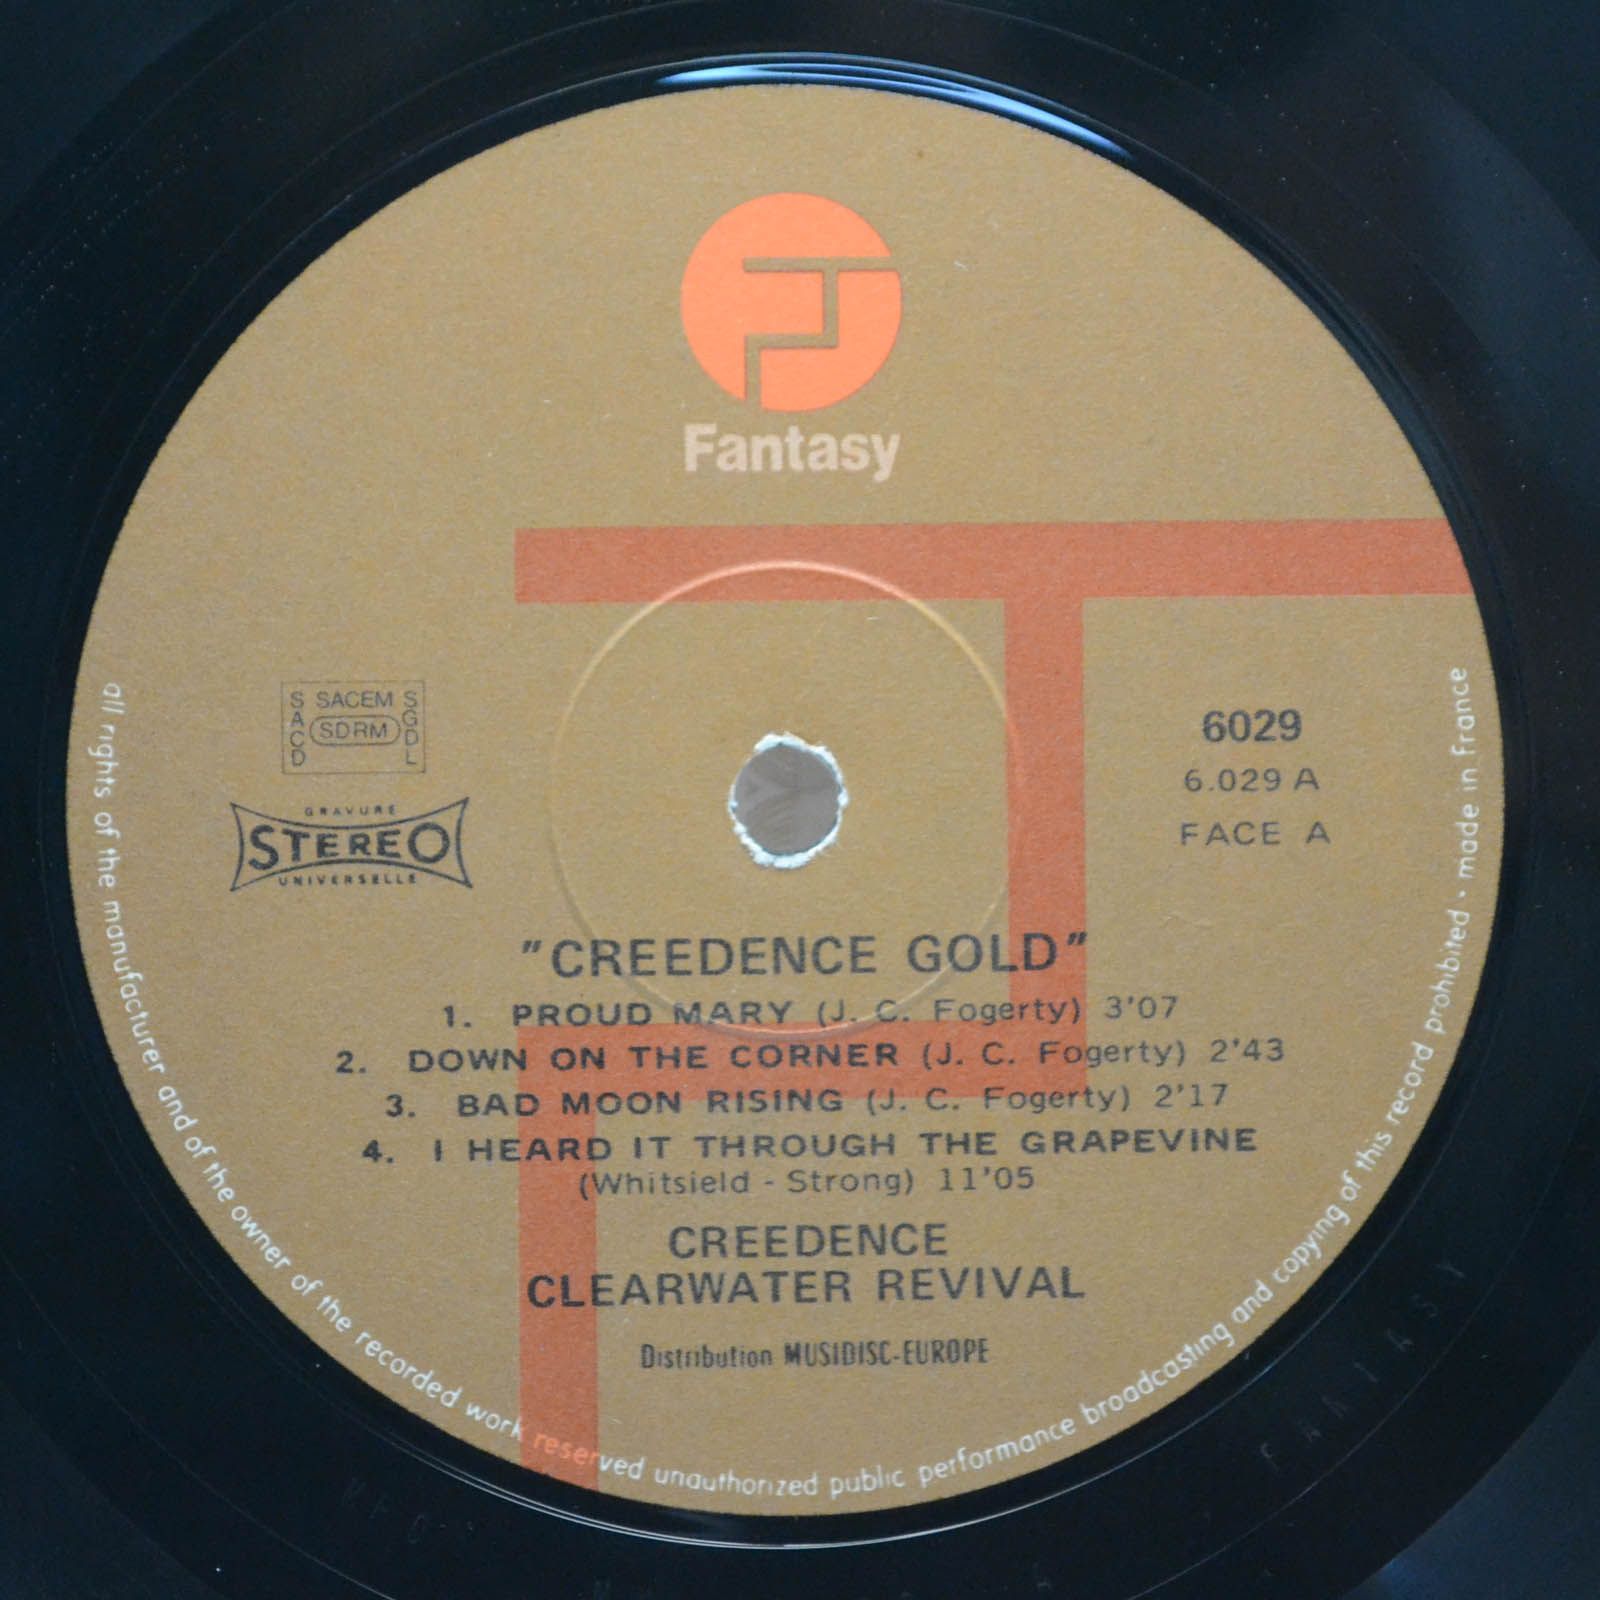 Creedence Clearwater Revival — Creedence Gold, 1973